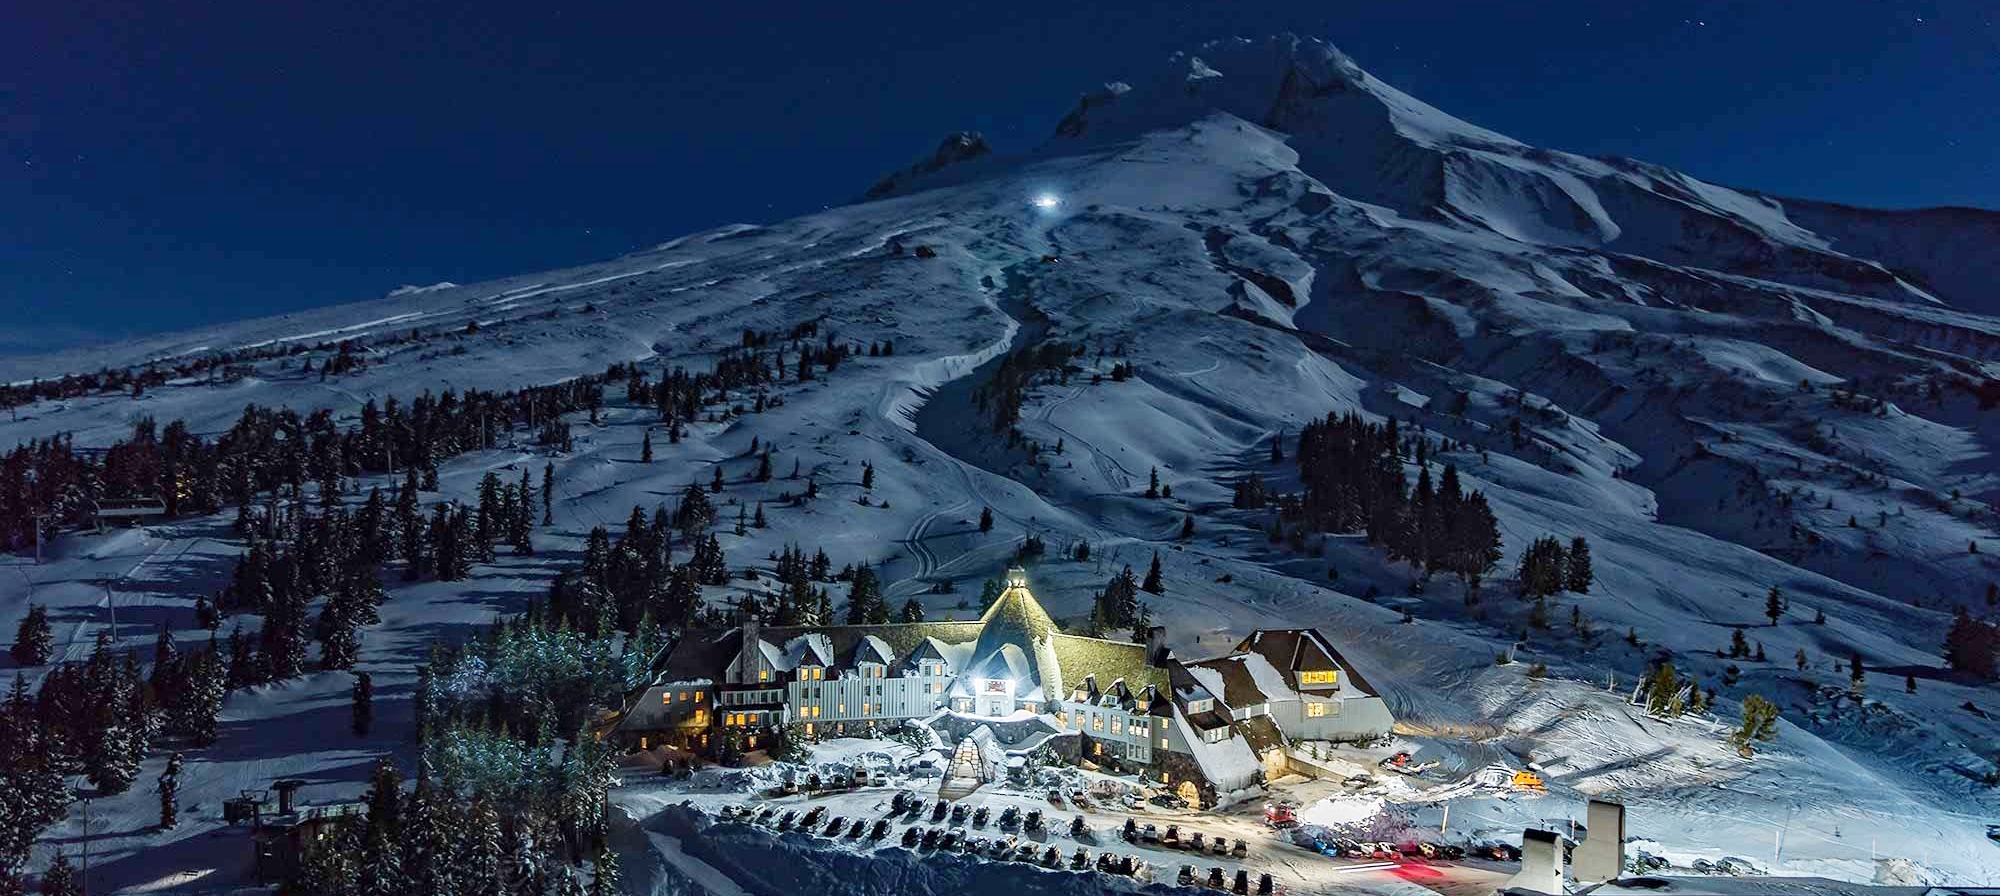 NIGHT-TIME DRONE VIEW OF TIMBERLINE LODGE AND MT. HOOD